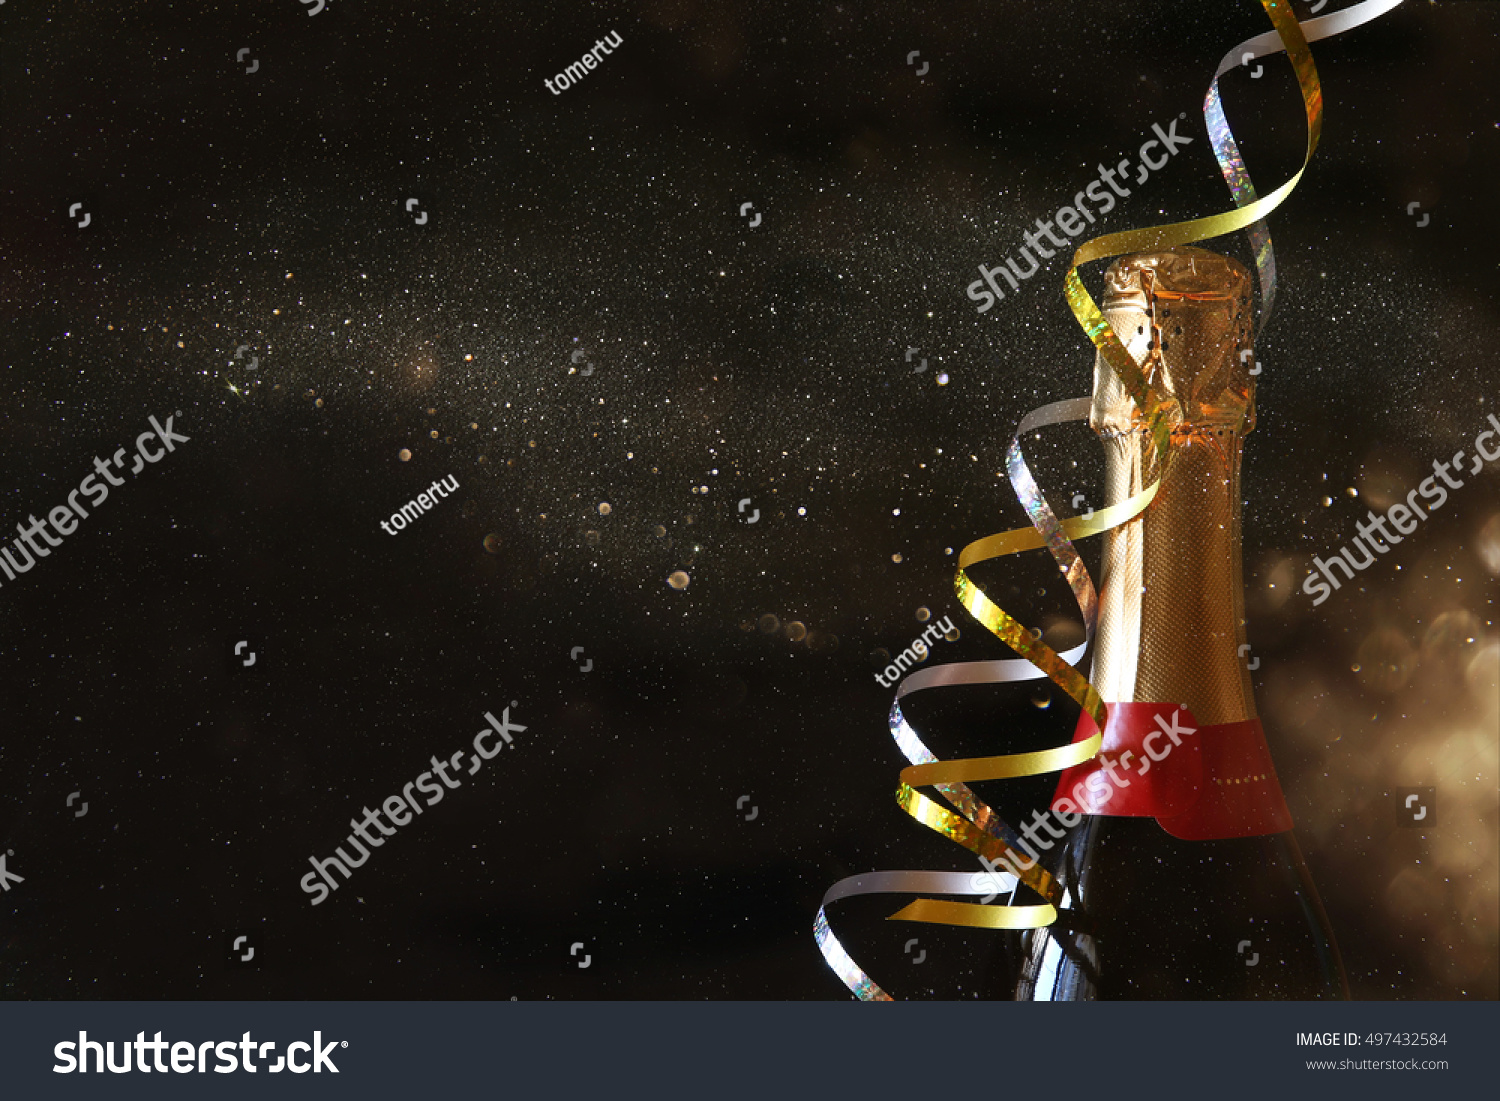 Champagne bottle in front of black background with glitter overlay. New year and celebration concept #497432584